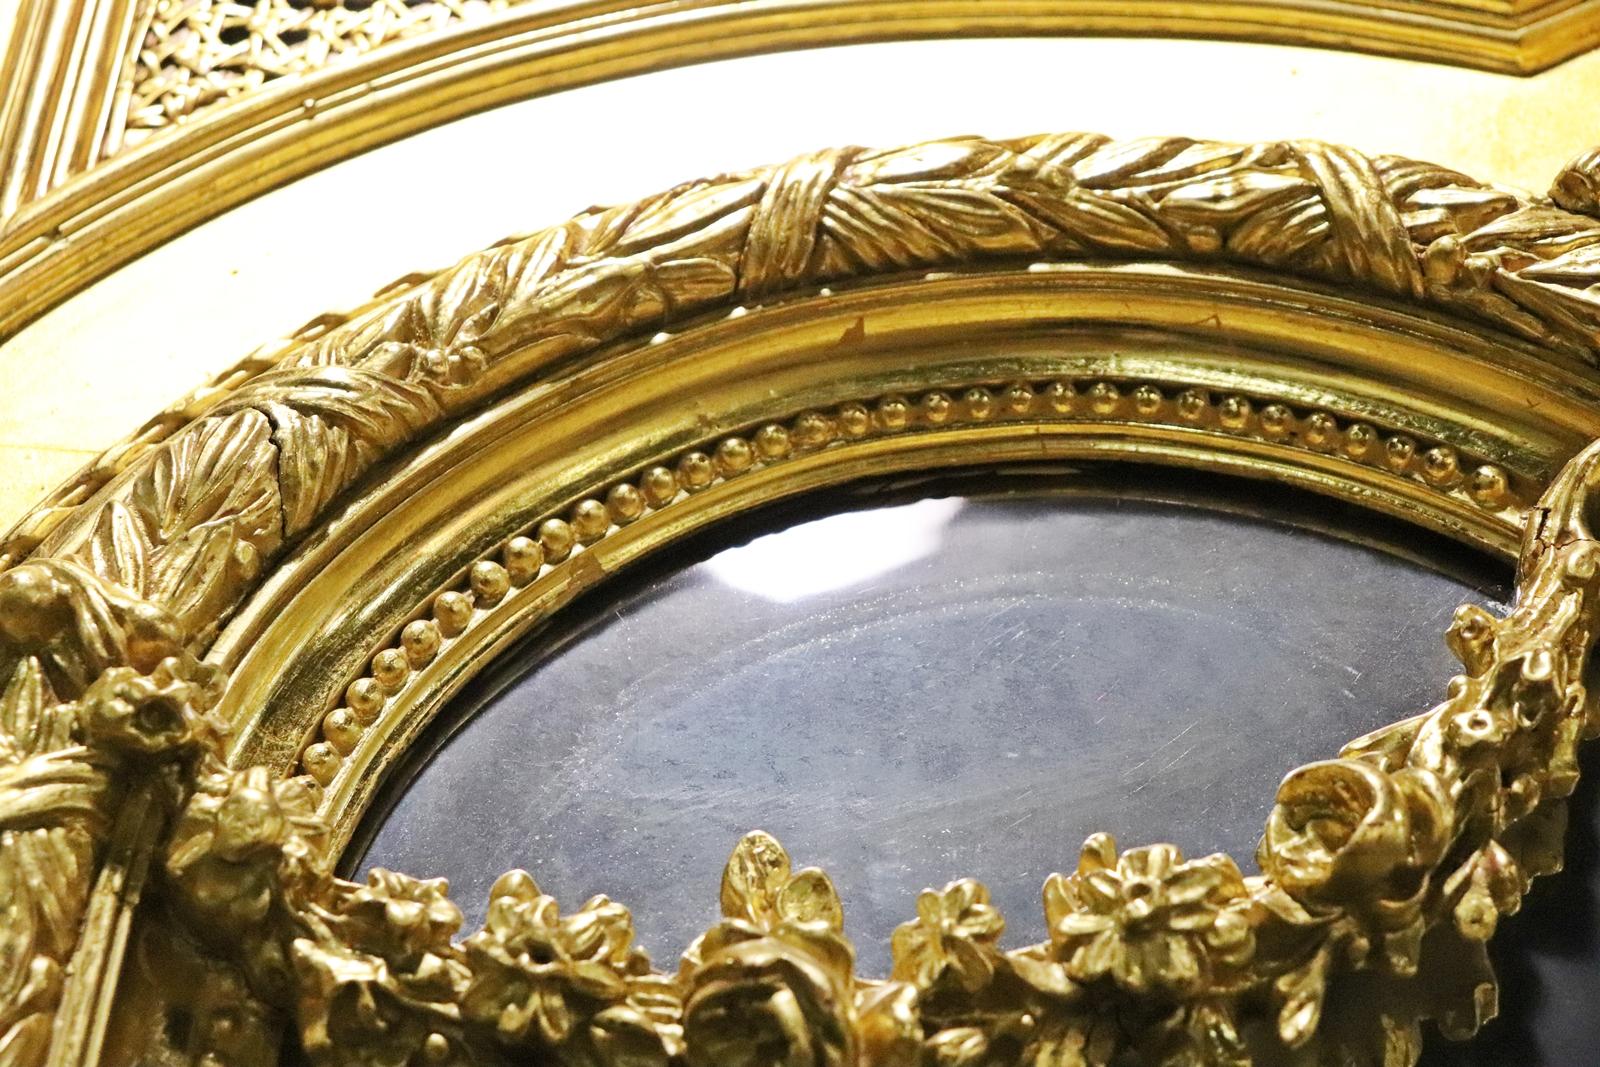 Monumental Gilded French Louis XV Trumeau Mirror with Planter Base Circa 1890 For Sale 6